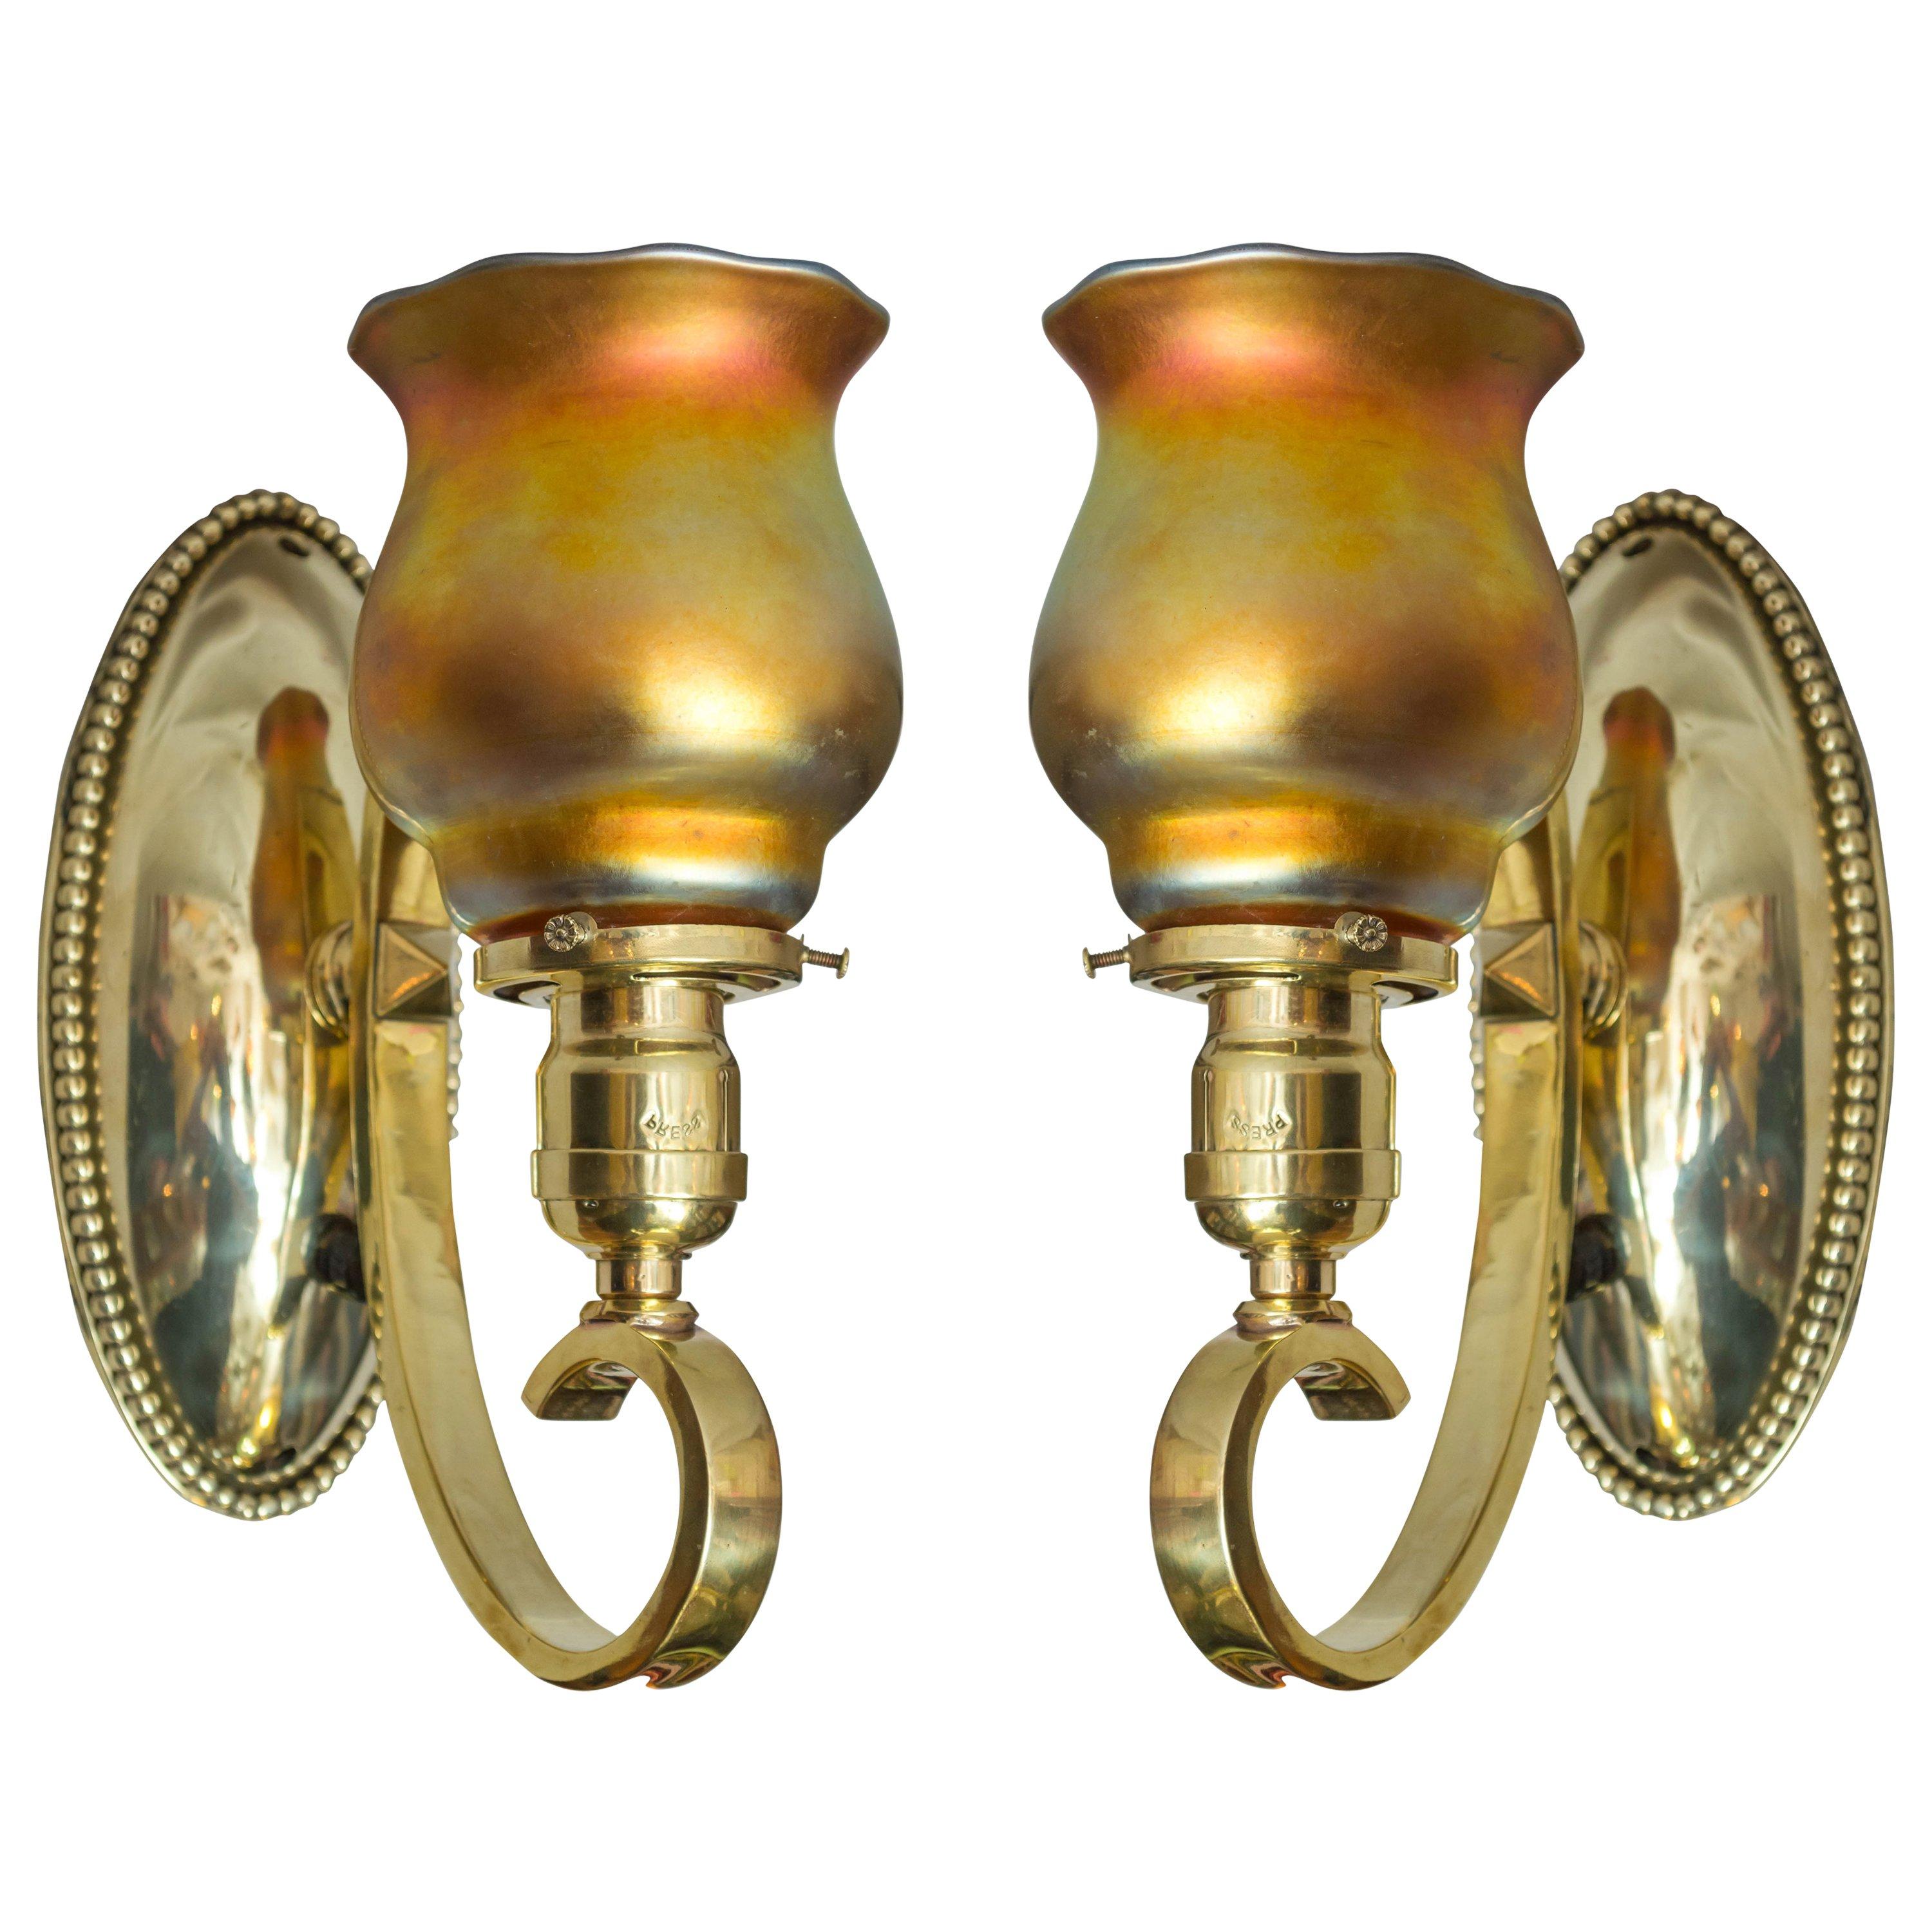 Pair of Arts & Crafts Polished Brass Sconces with Handblown Glass Shades